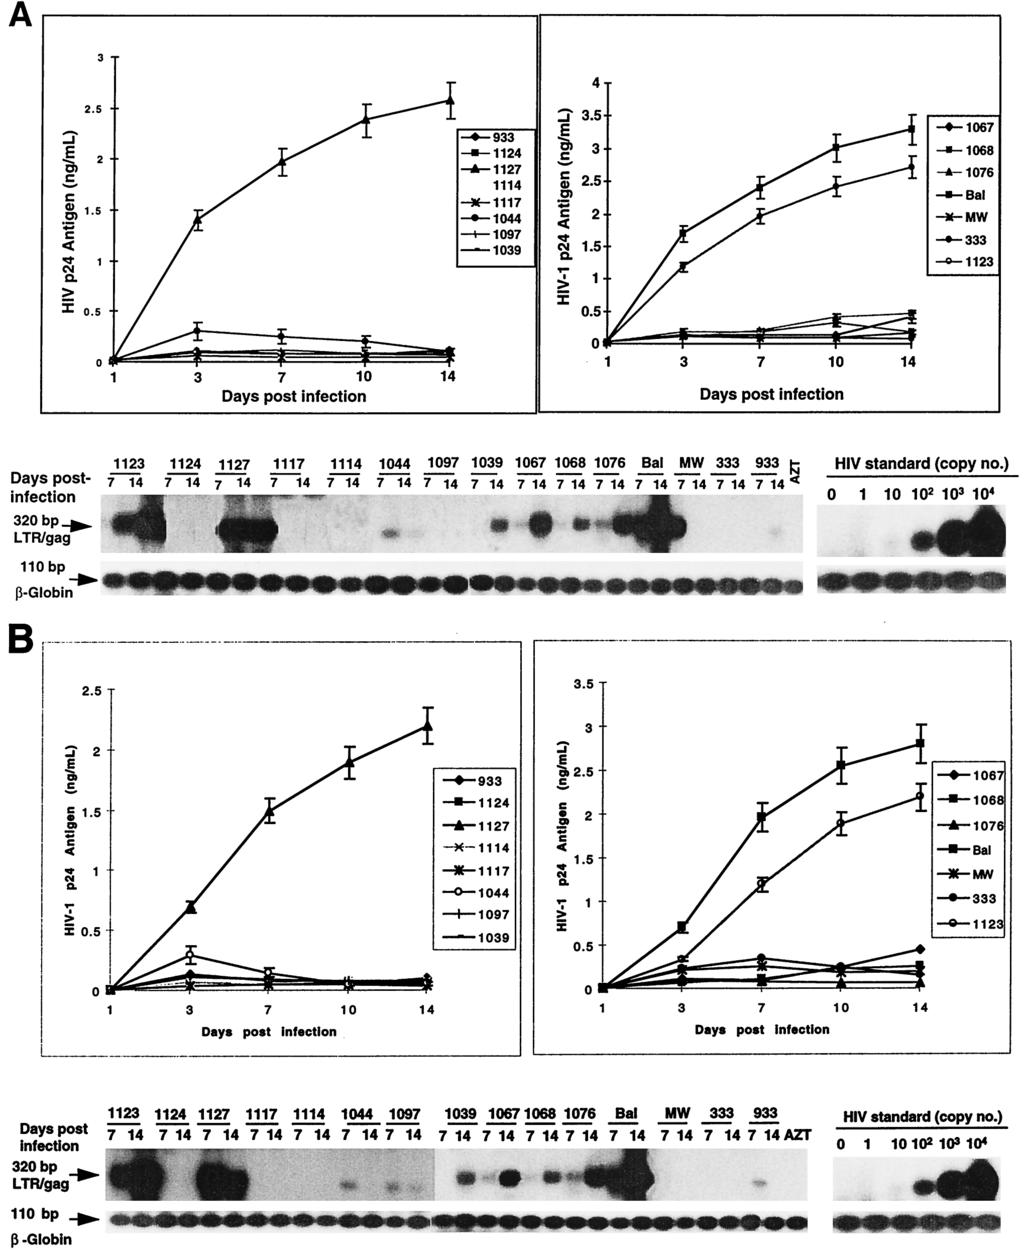 VOL. 73, 1999 HOST GENETICS AND HIV REPLICATION IN TWINS 4869 FIG. 1. Phase I: ID twin pairs.